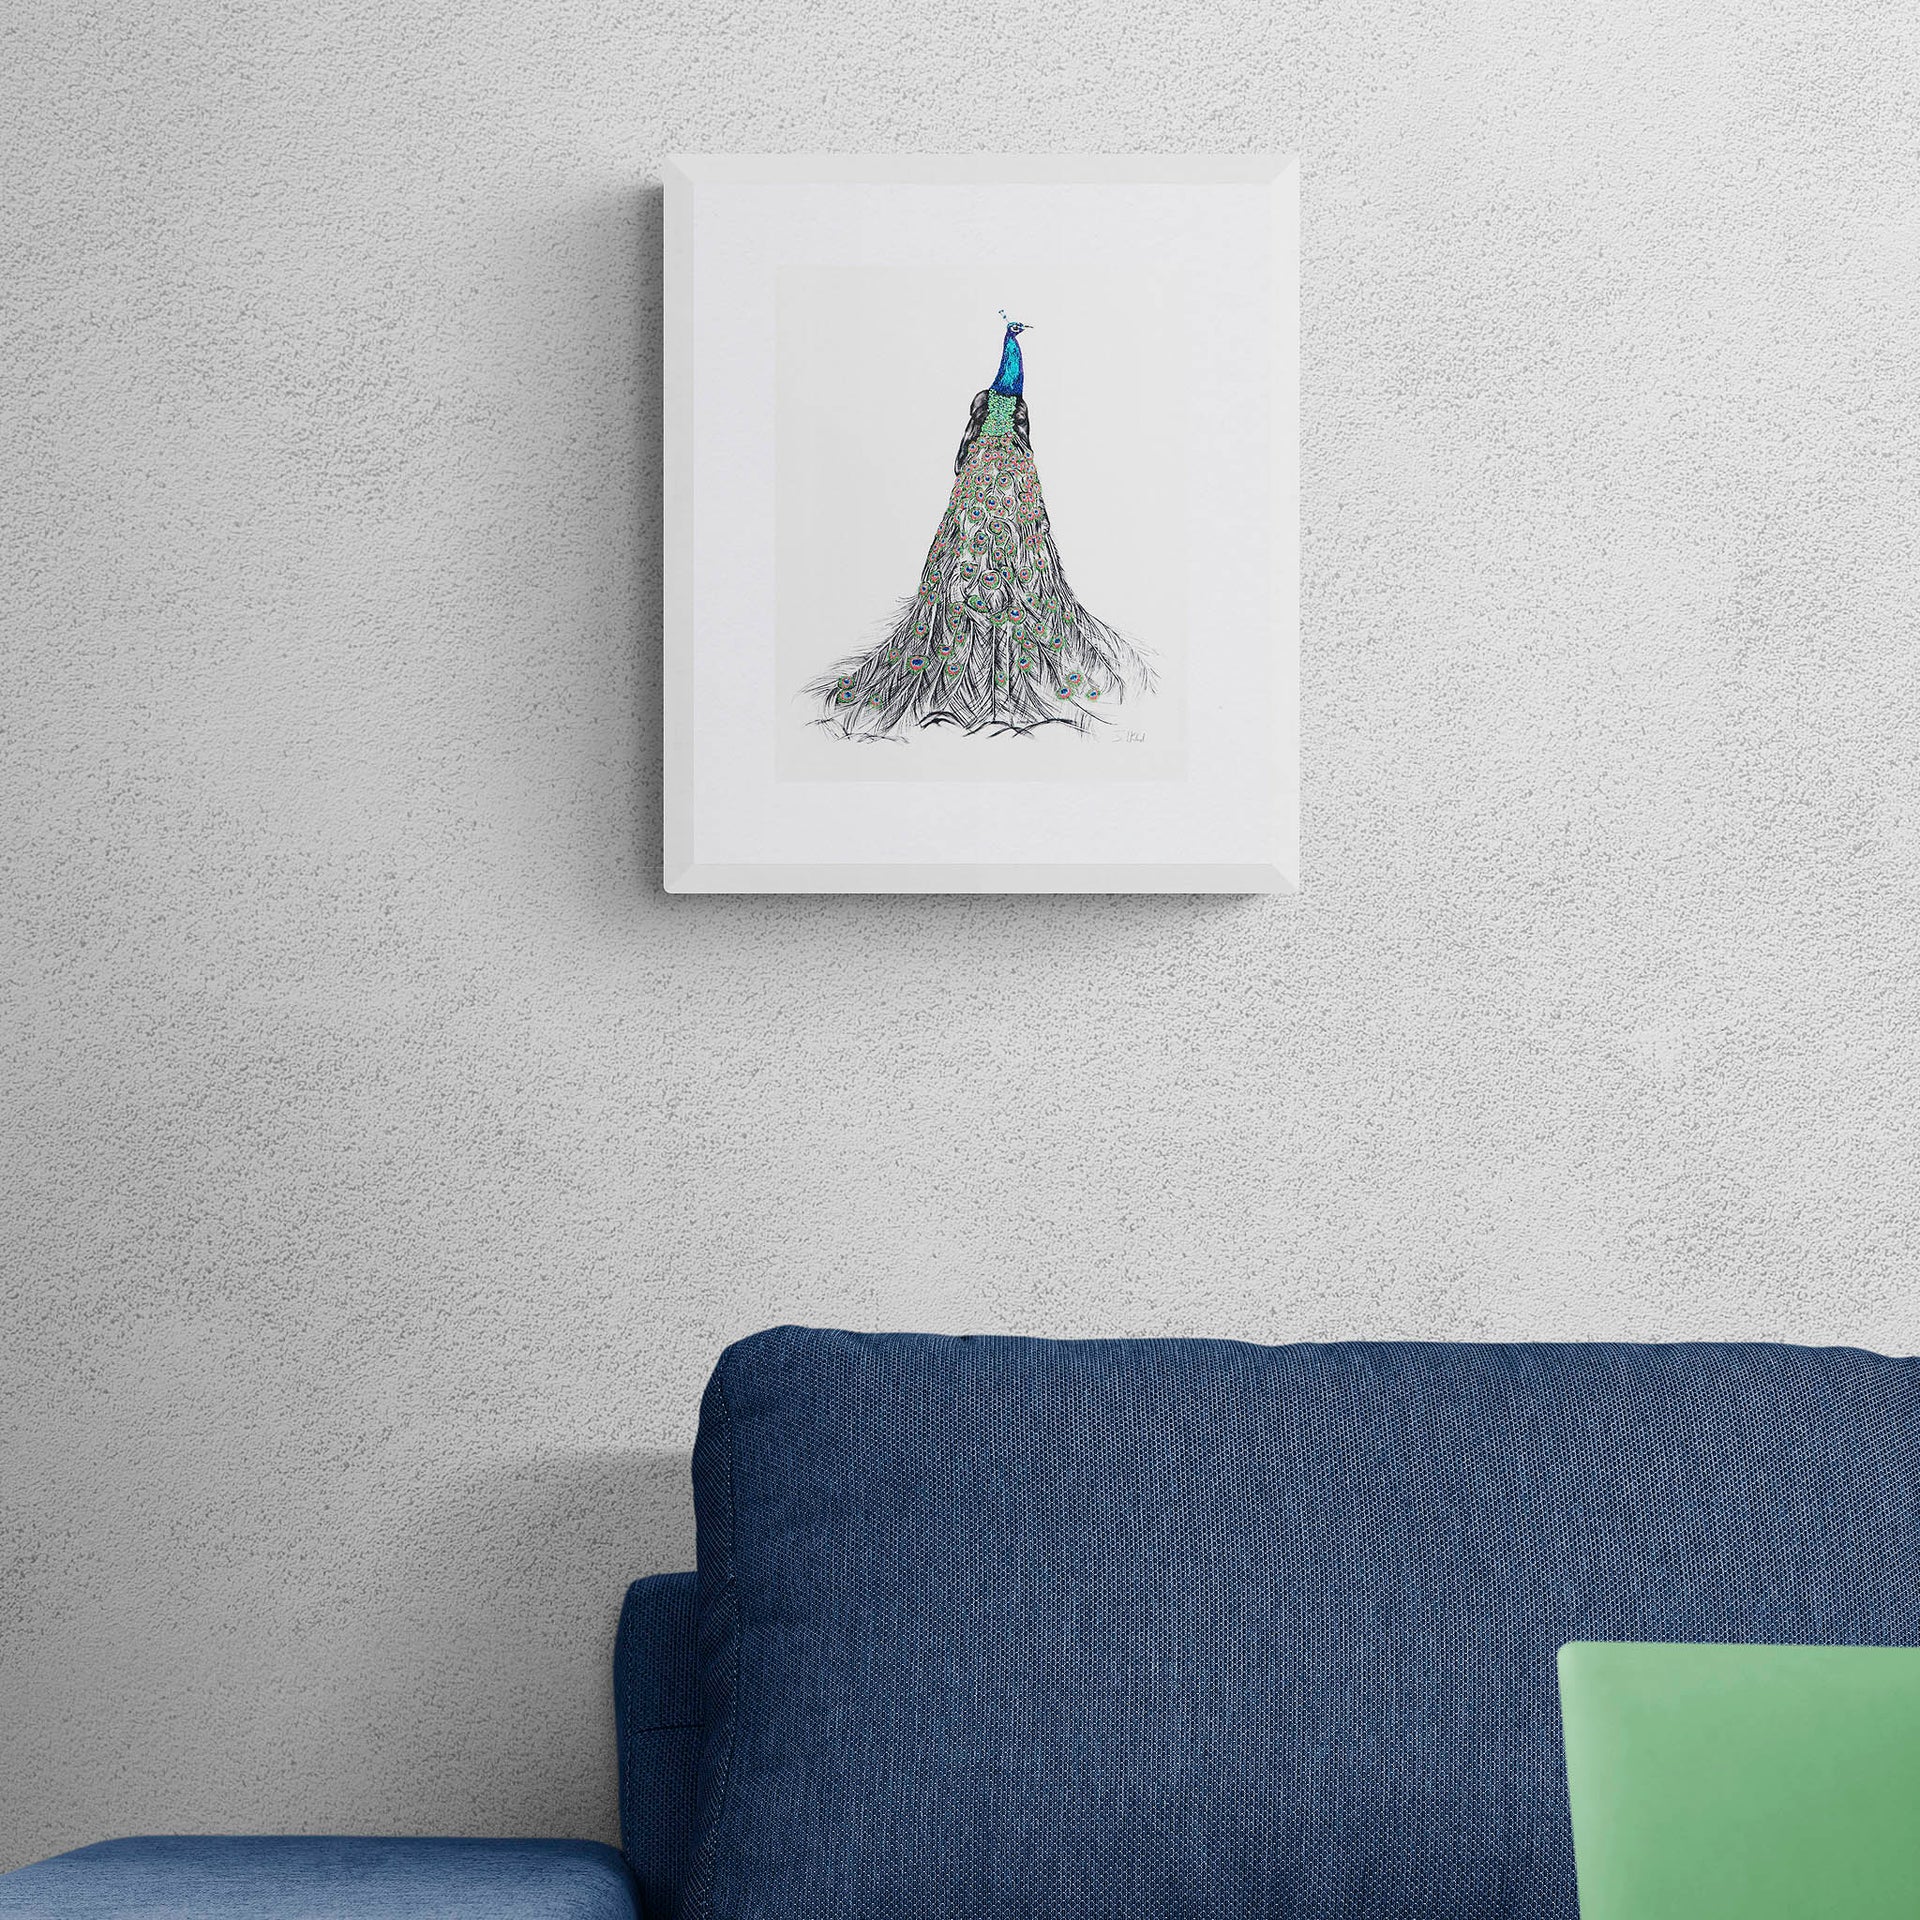 Peacock hand embroidered limited edition print in frame on the wall